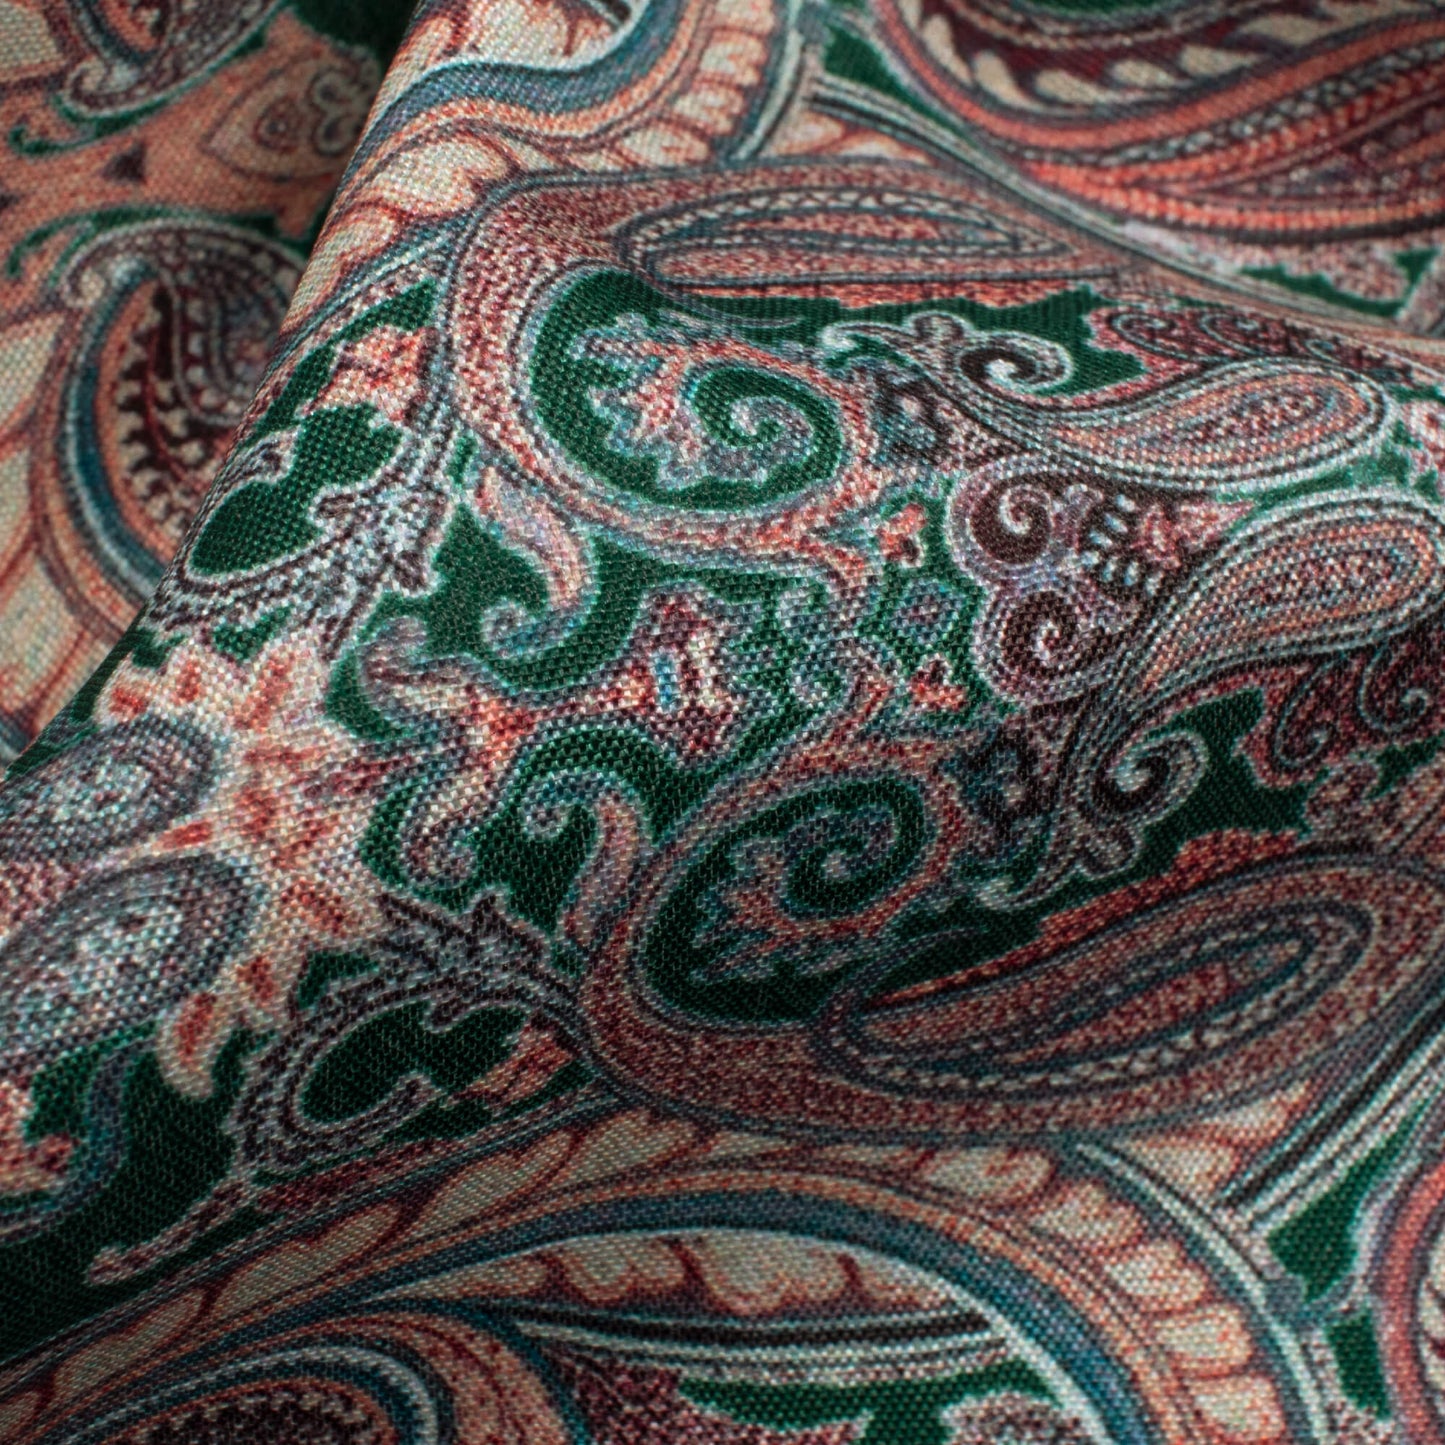 Forest Green And Cream Paisley Pattern Digital Print Crepe Silk Fabric